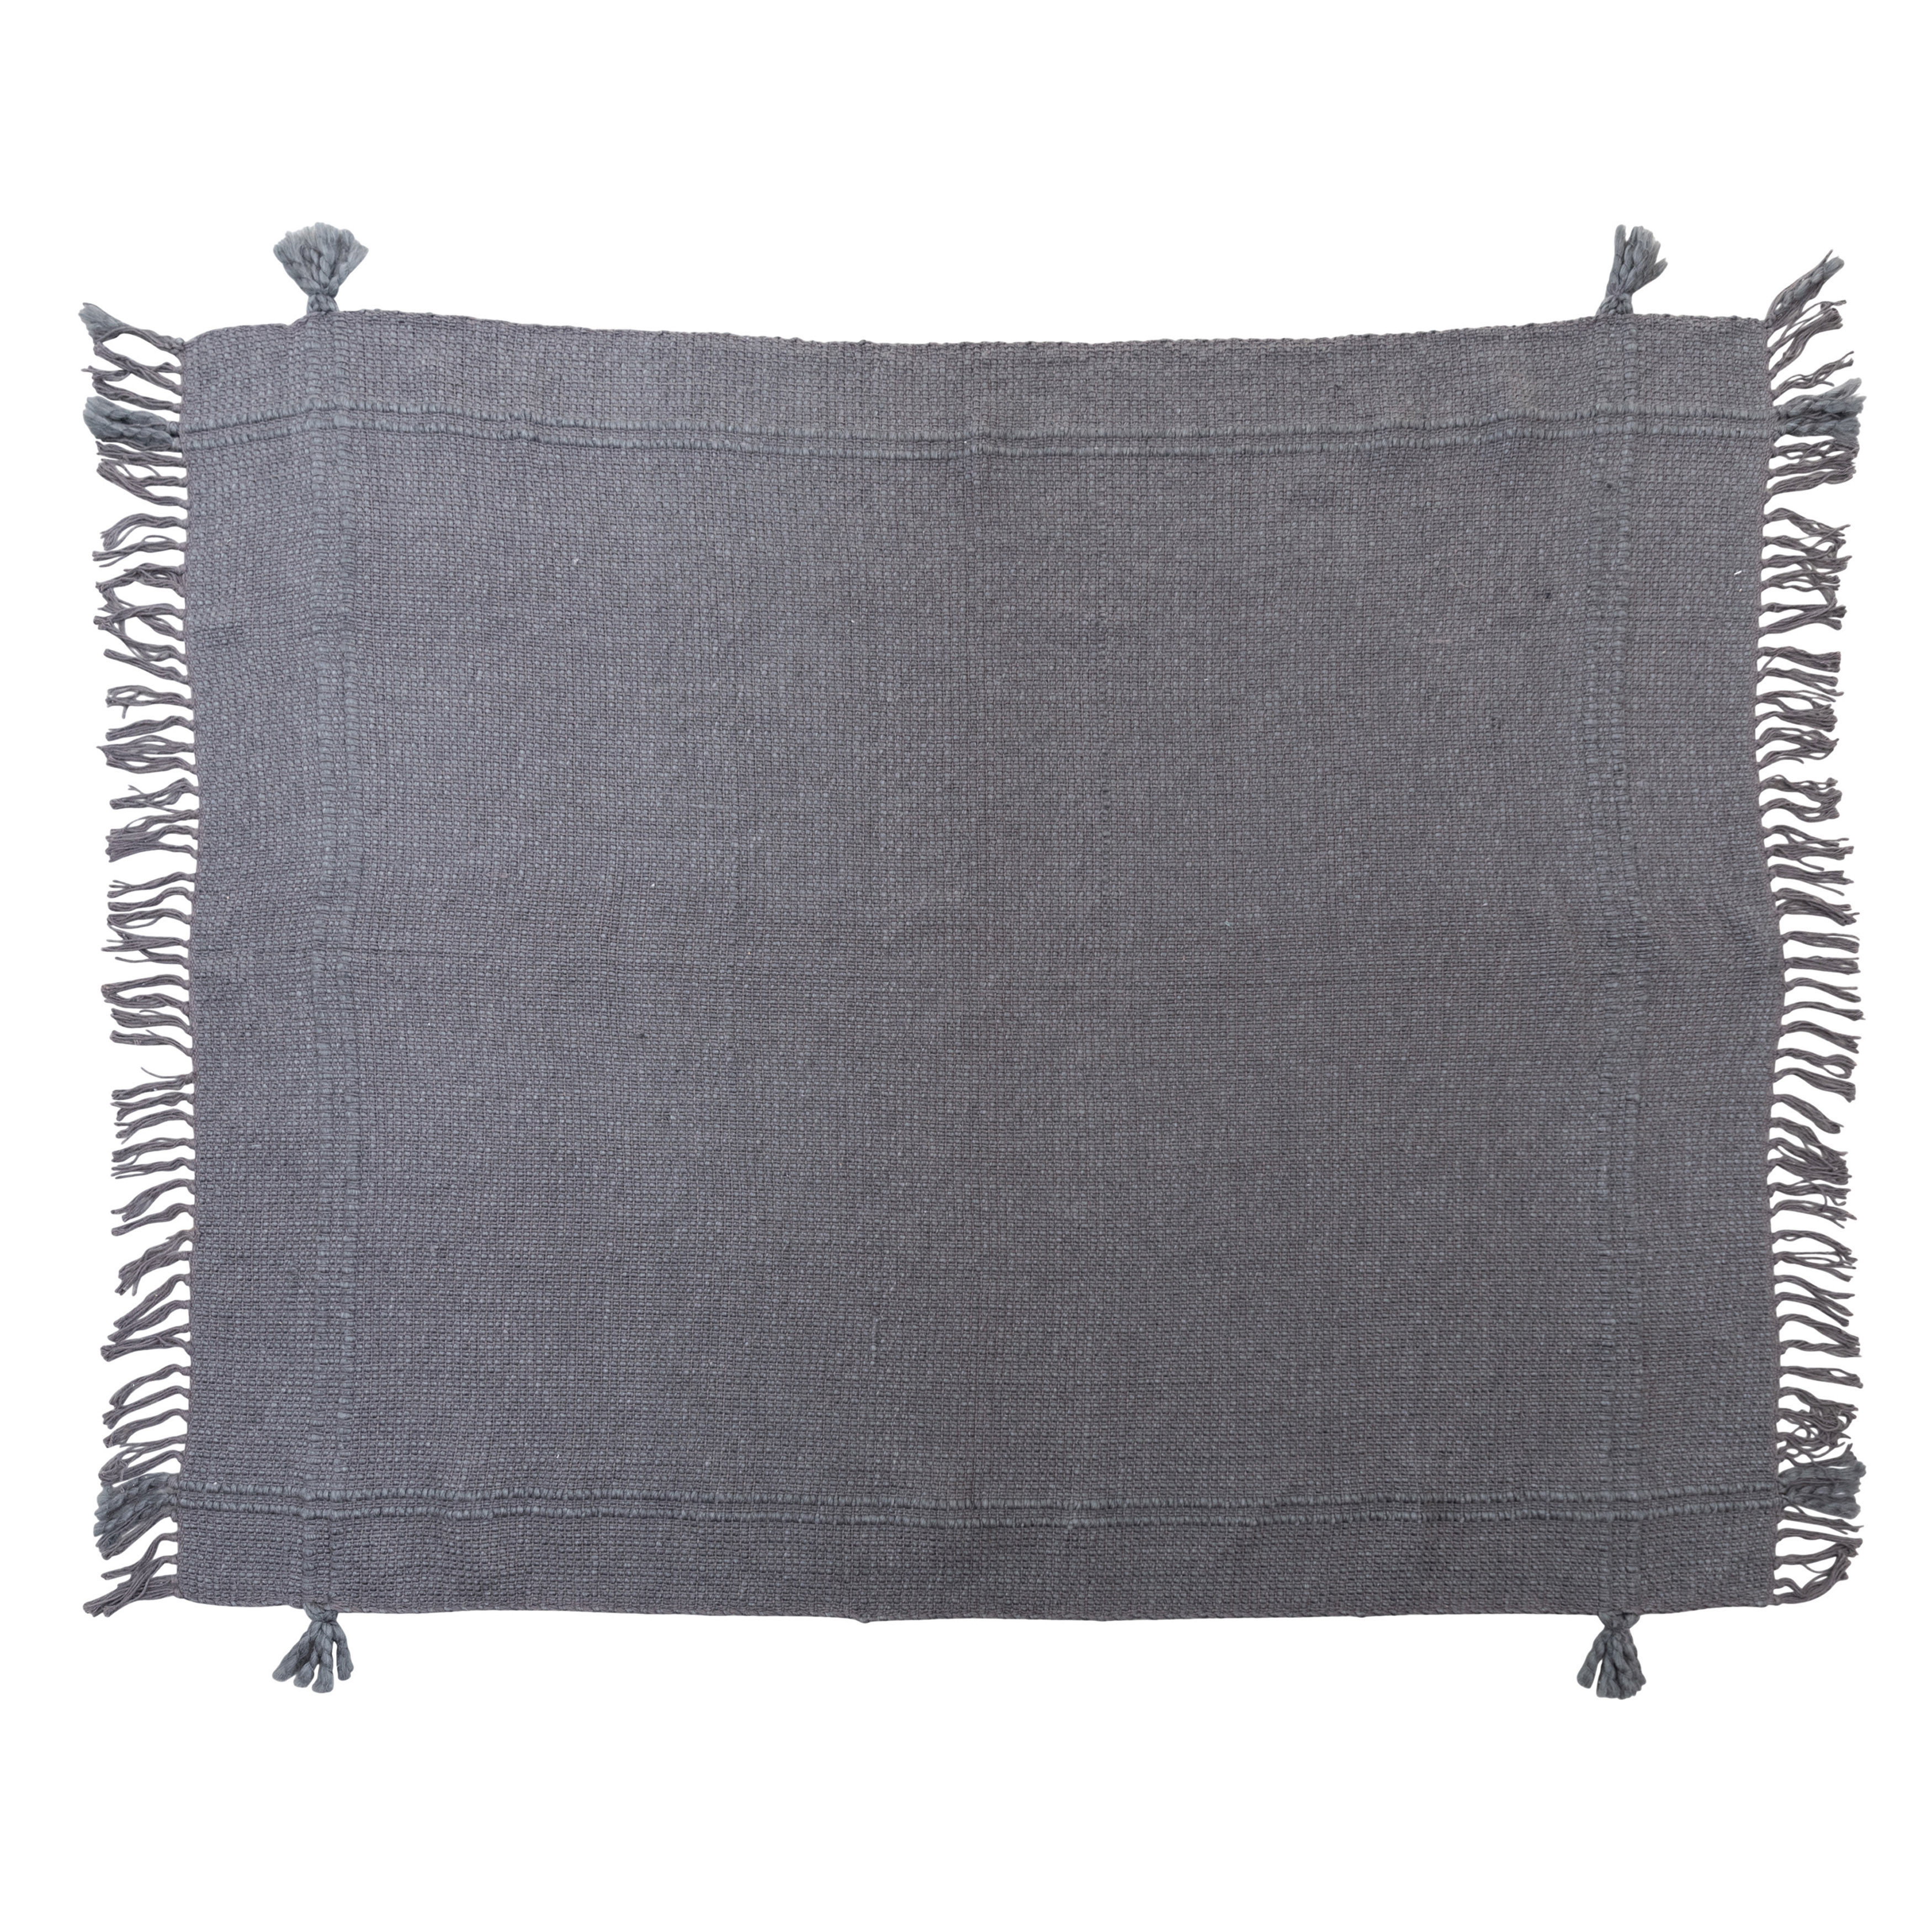  Woven Cotton Blend Throw Blanket with Fringe and Tassels, Charcoal - Image 0